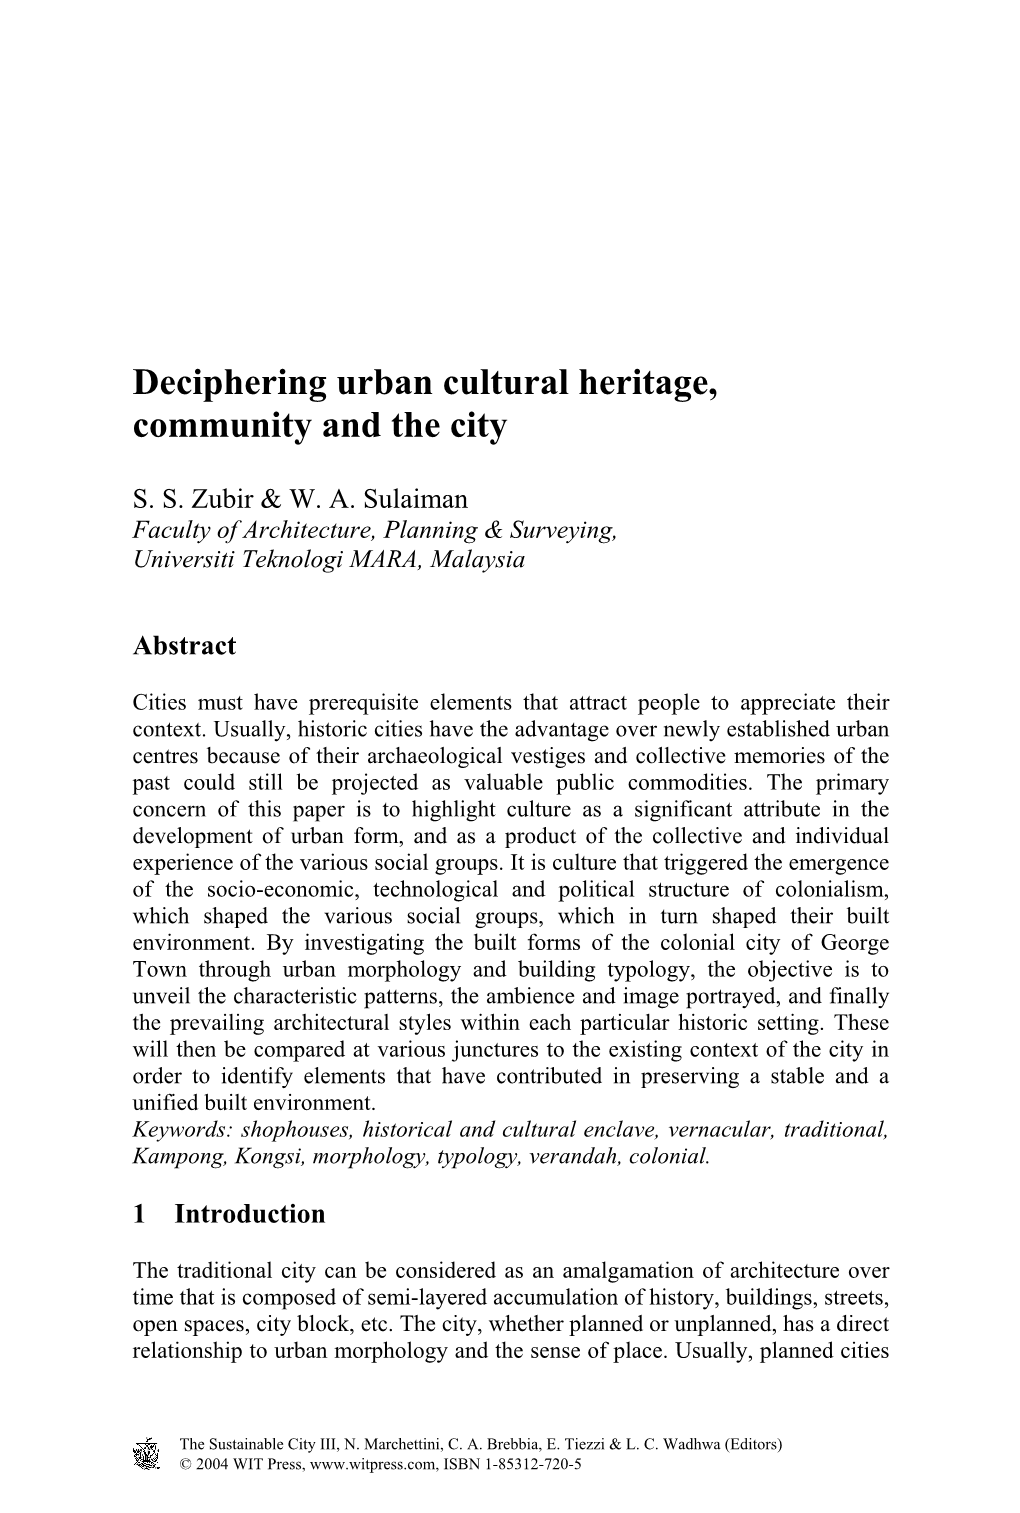 Deciphering Urban Cultural Heritage, Community and the City